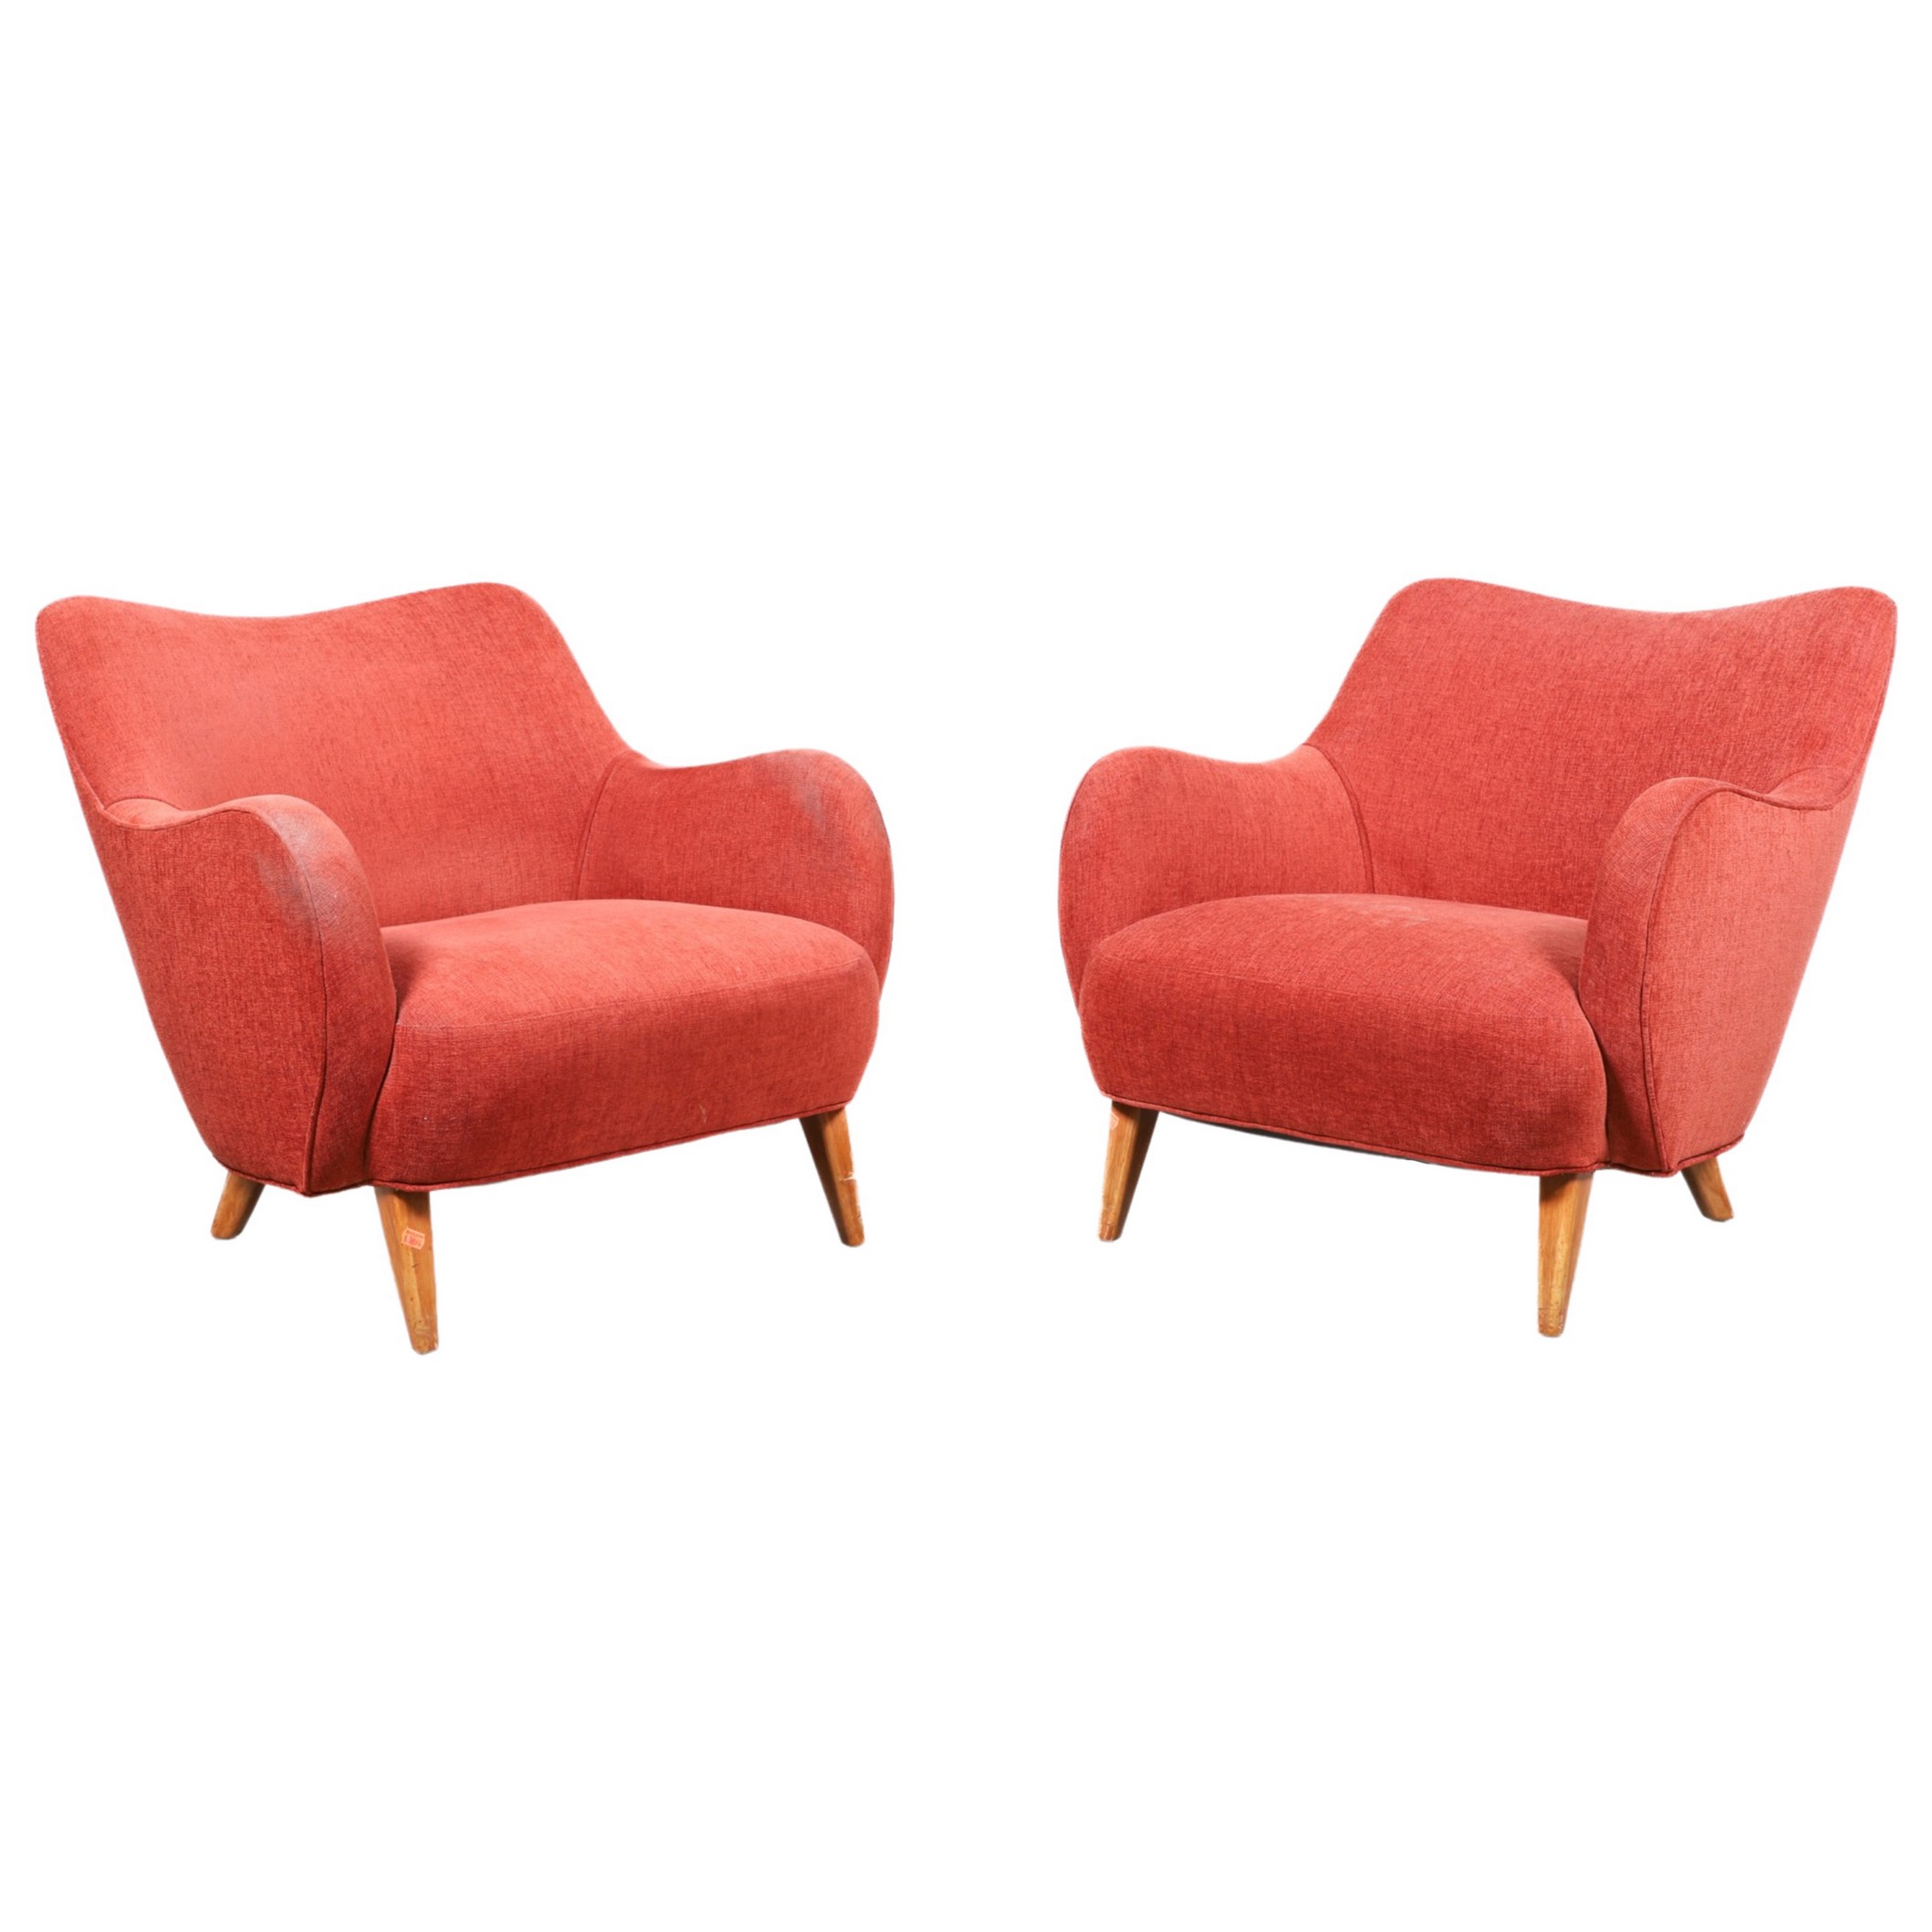 Pair Marco Zanuso style upholstered